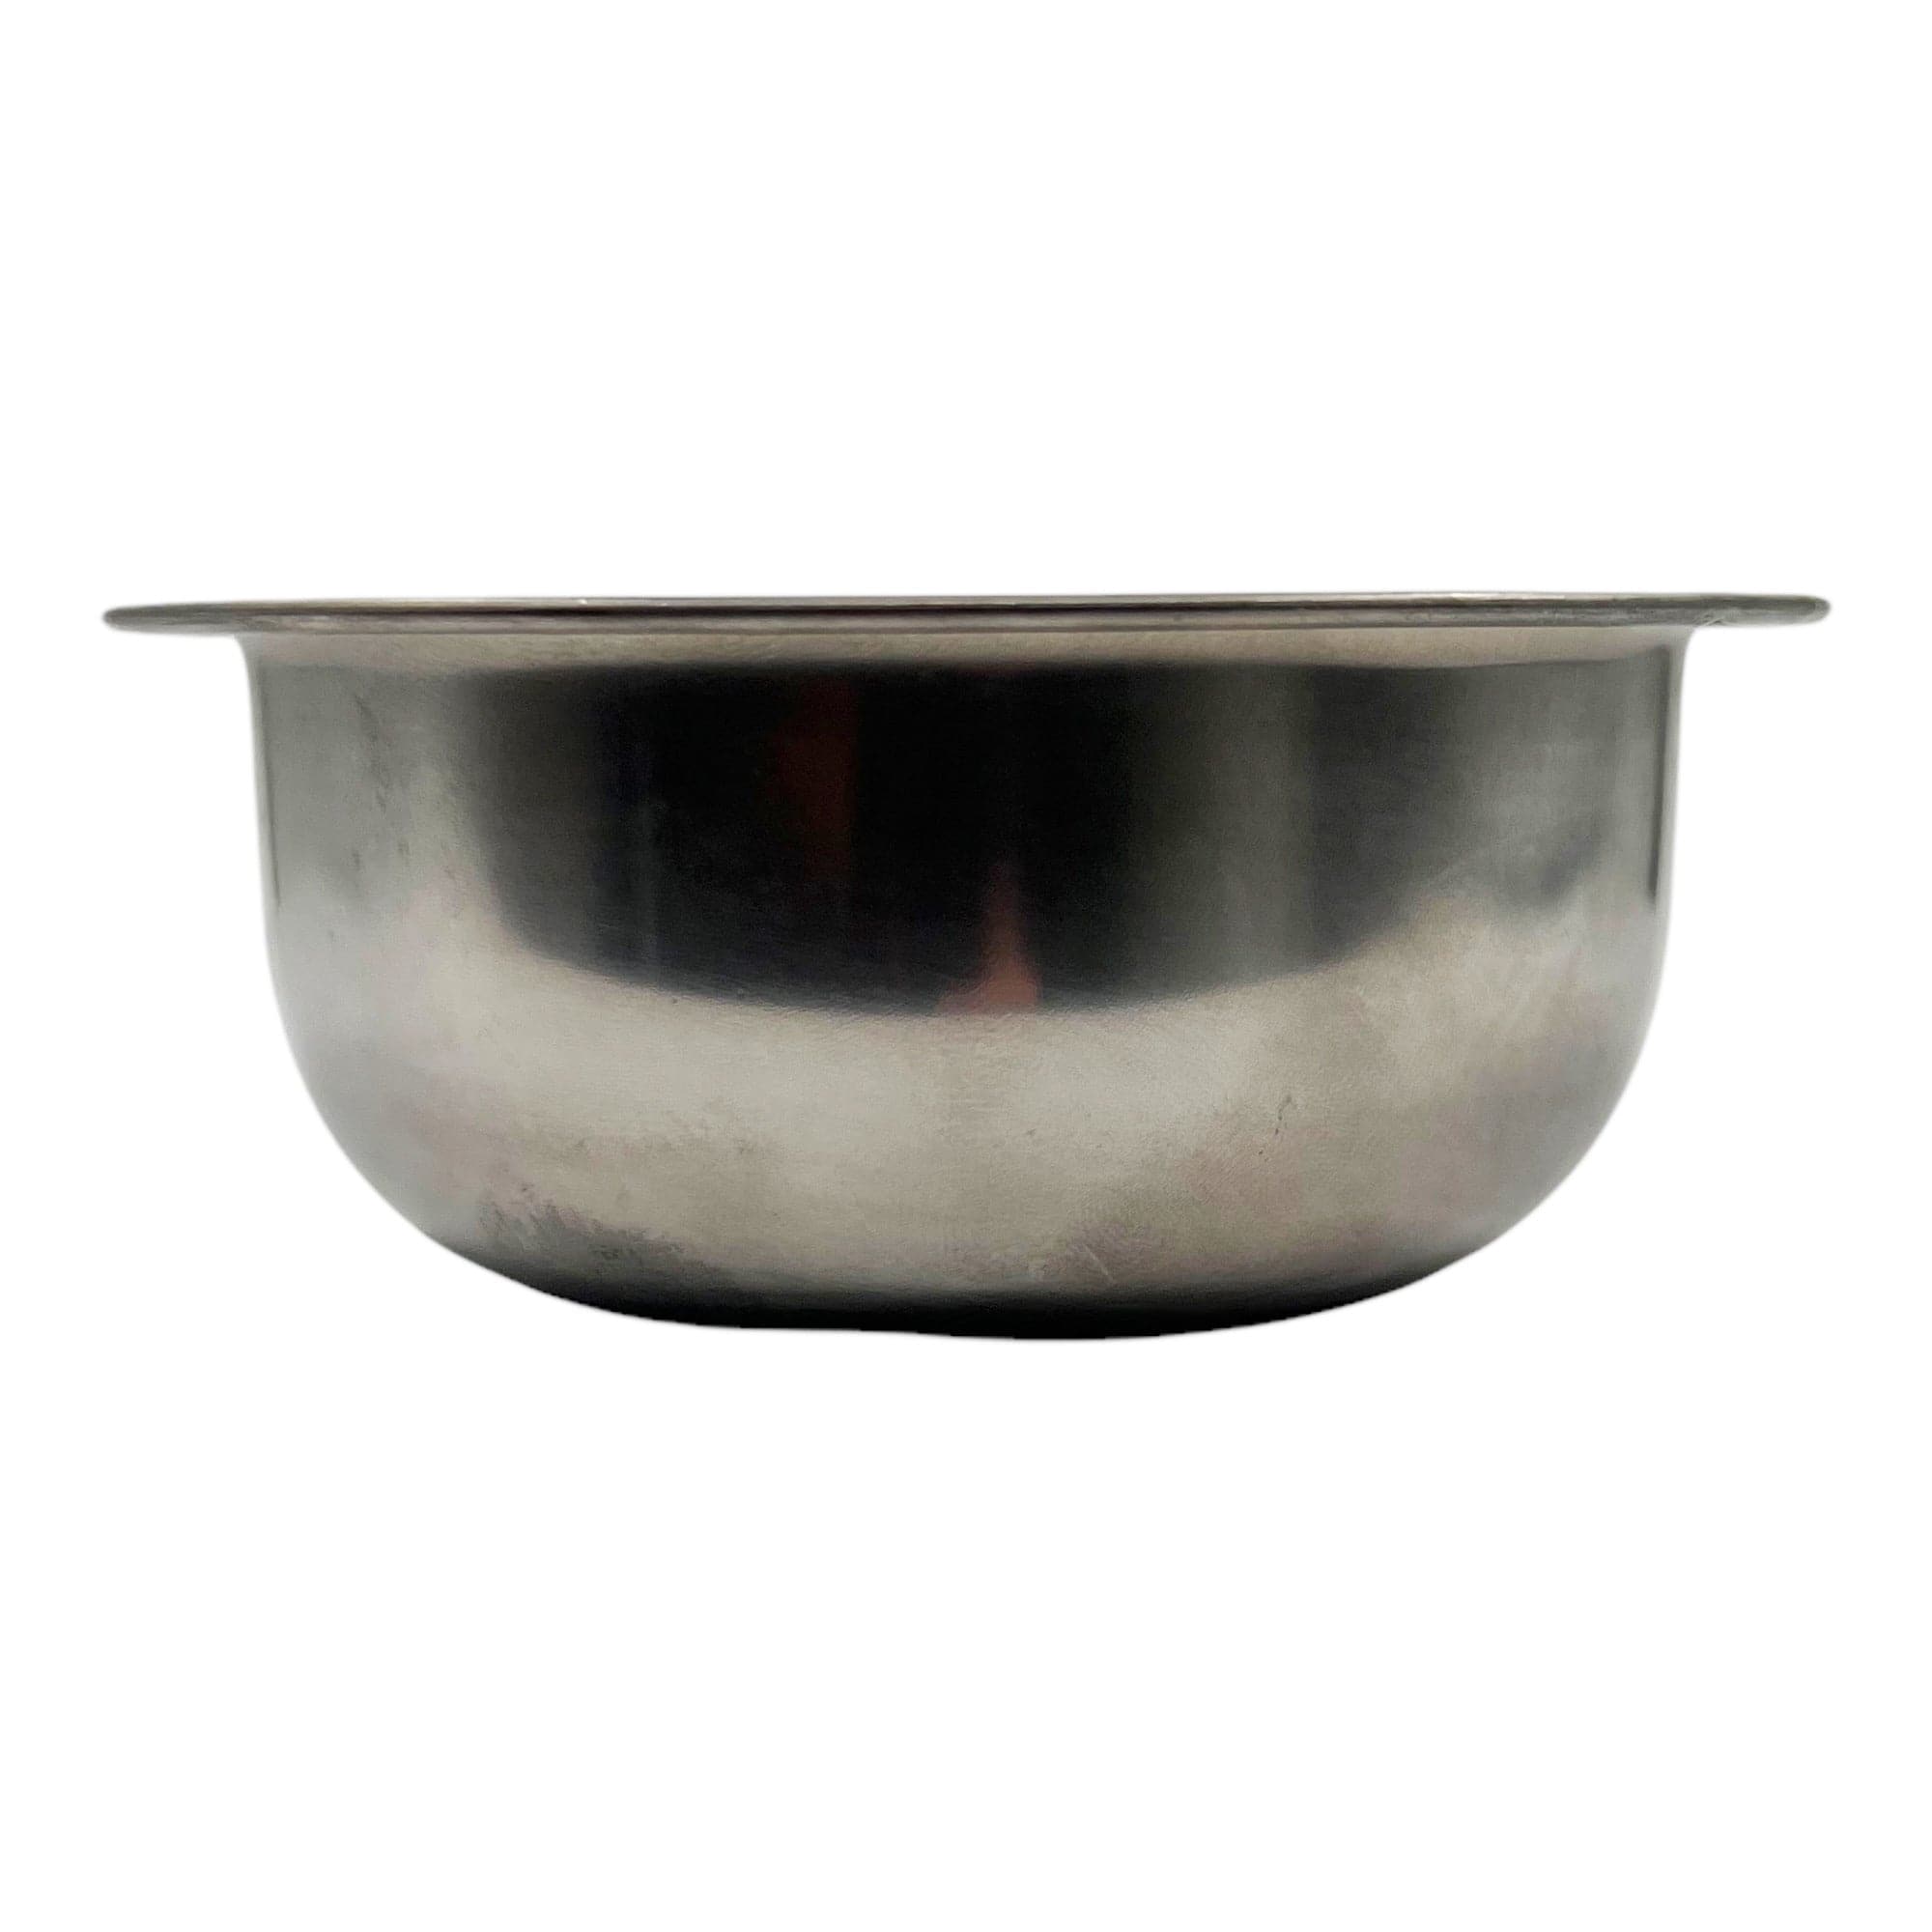 Eson - Stainless Steel Shaving Bowl Iconic Shape 5x12cm - Eson Direct